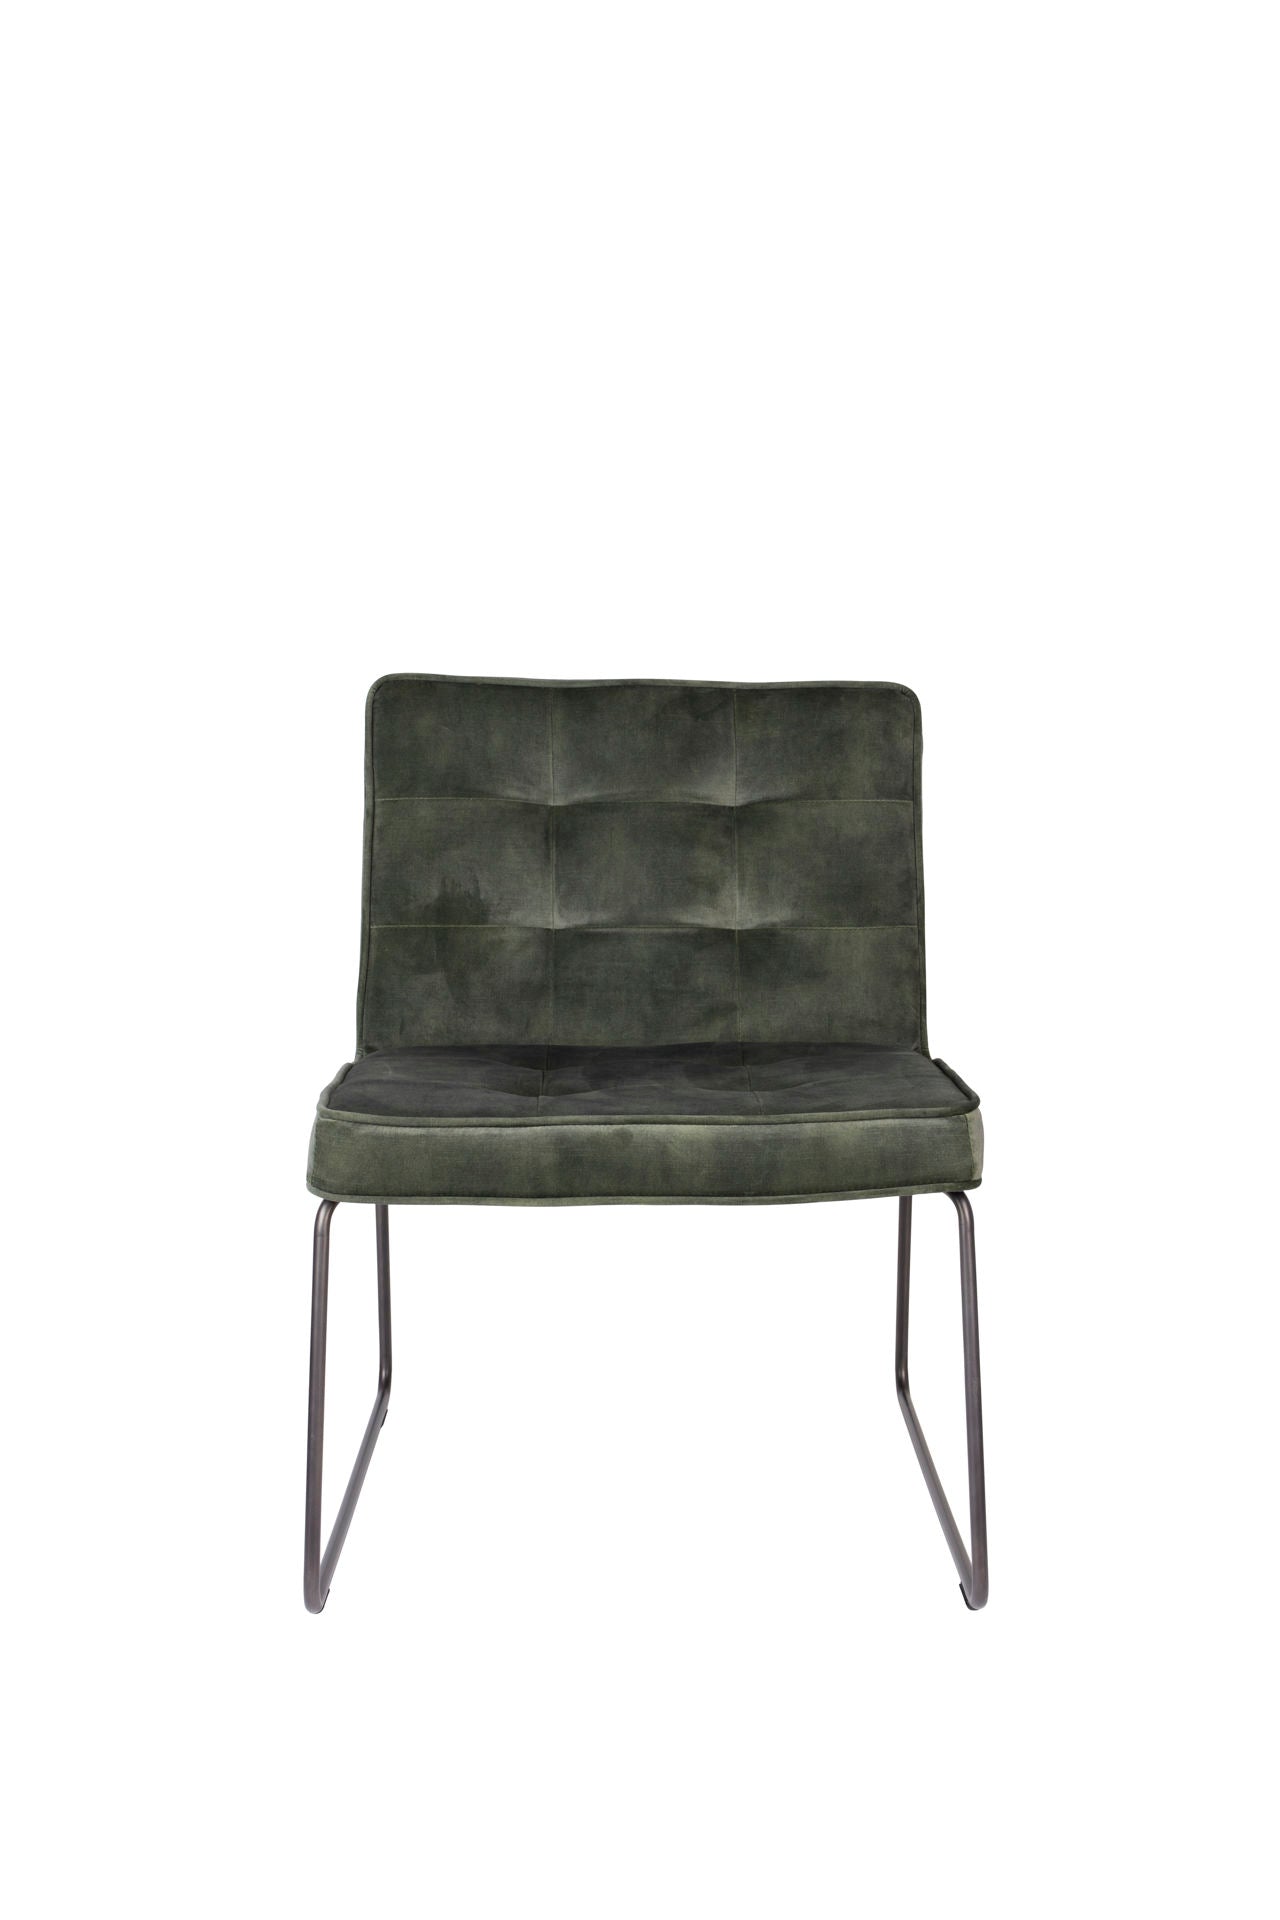 Nancy's Gold Canyon Lounge Chair - Industrial - Green - Polyester, Plywood, Metal - 69 cm x 55.5 cm x 75 cm